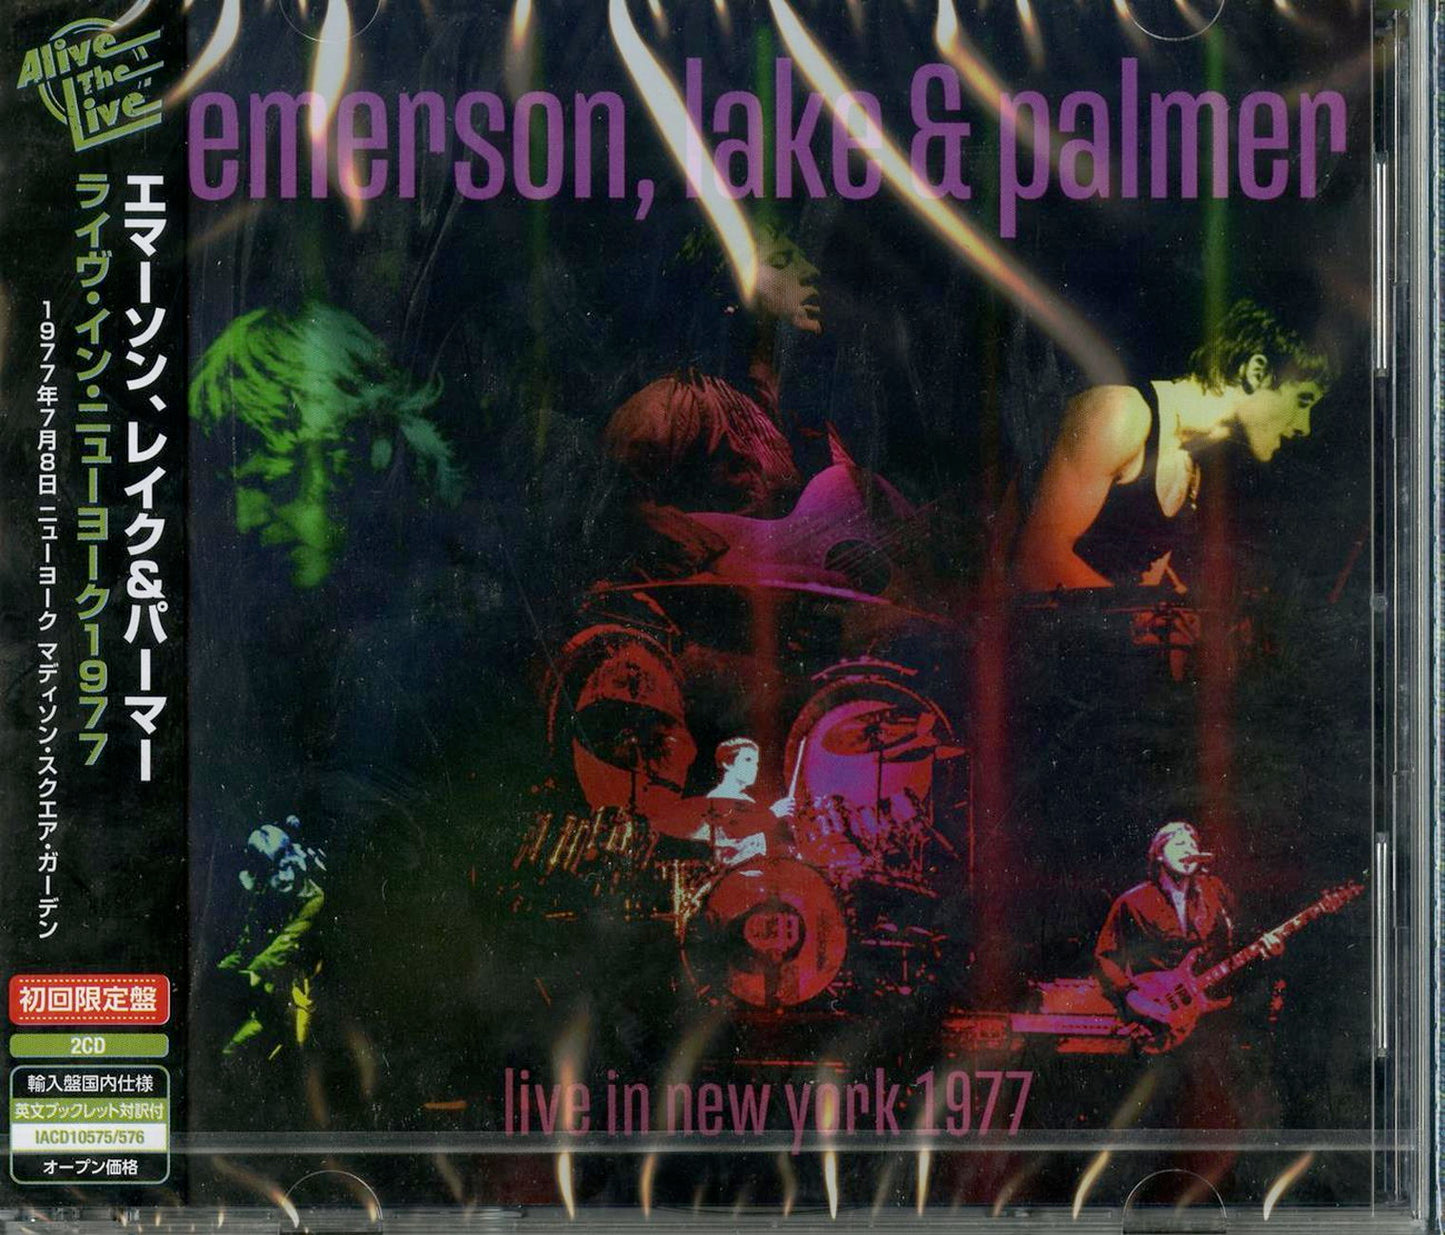 Emerson, Lake & Palmer - Live In New York 1977 - Import 2 CD